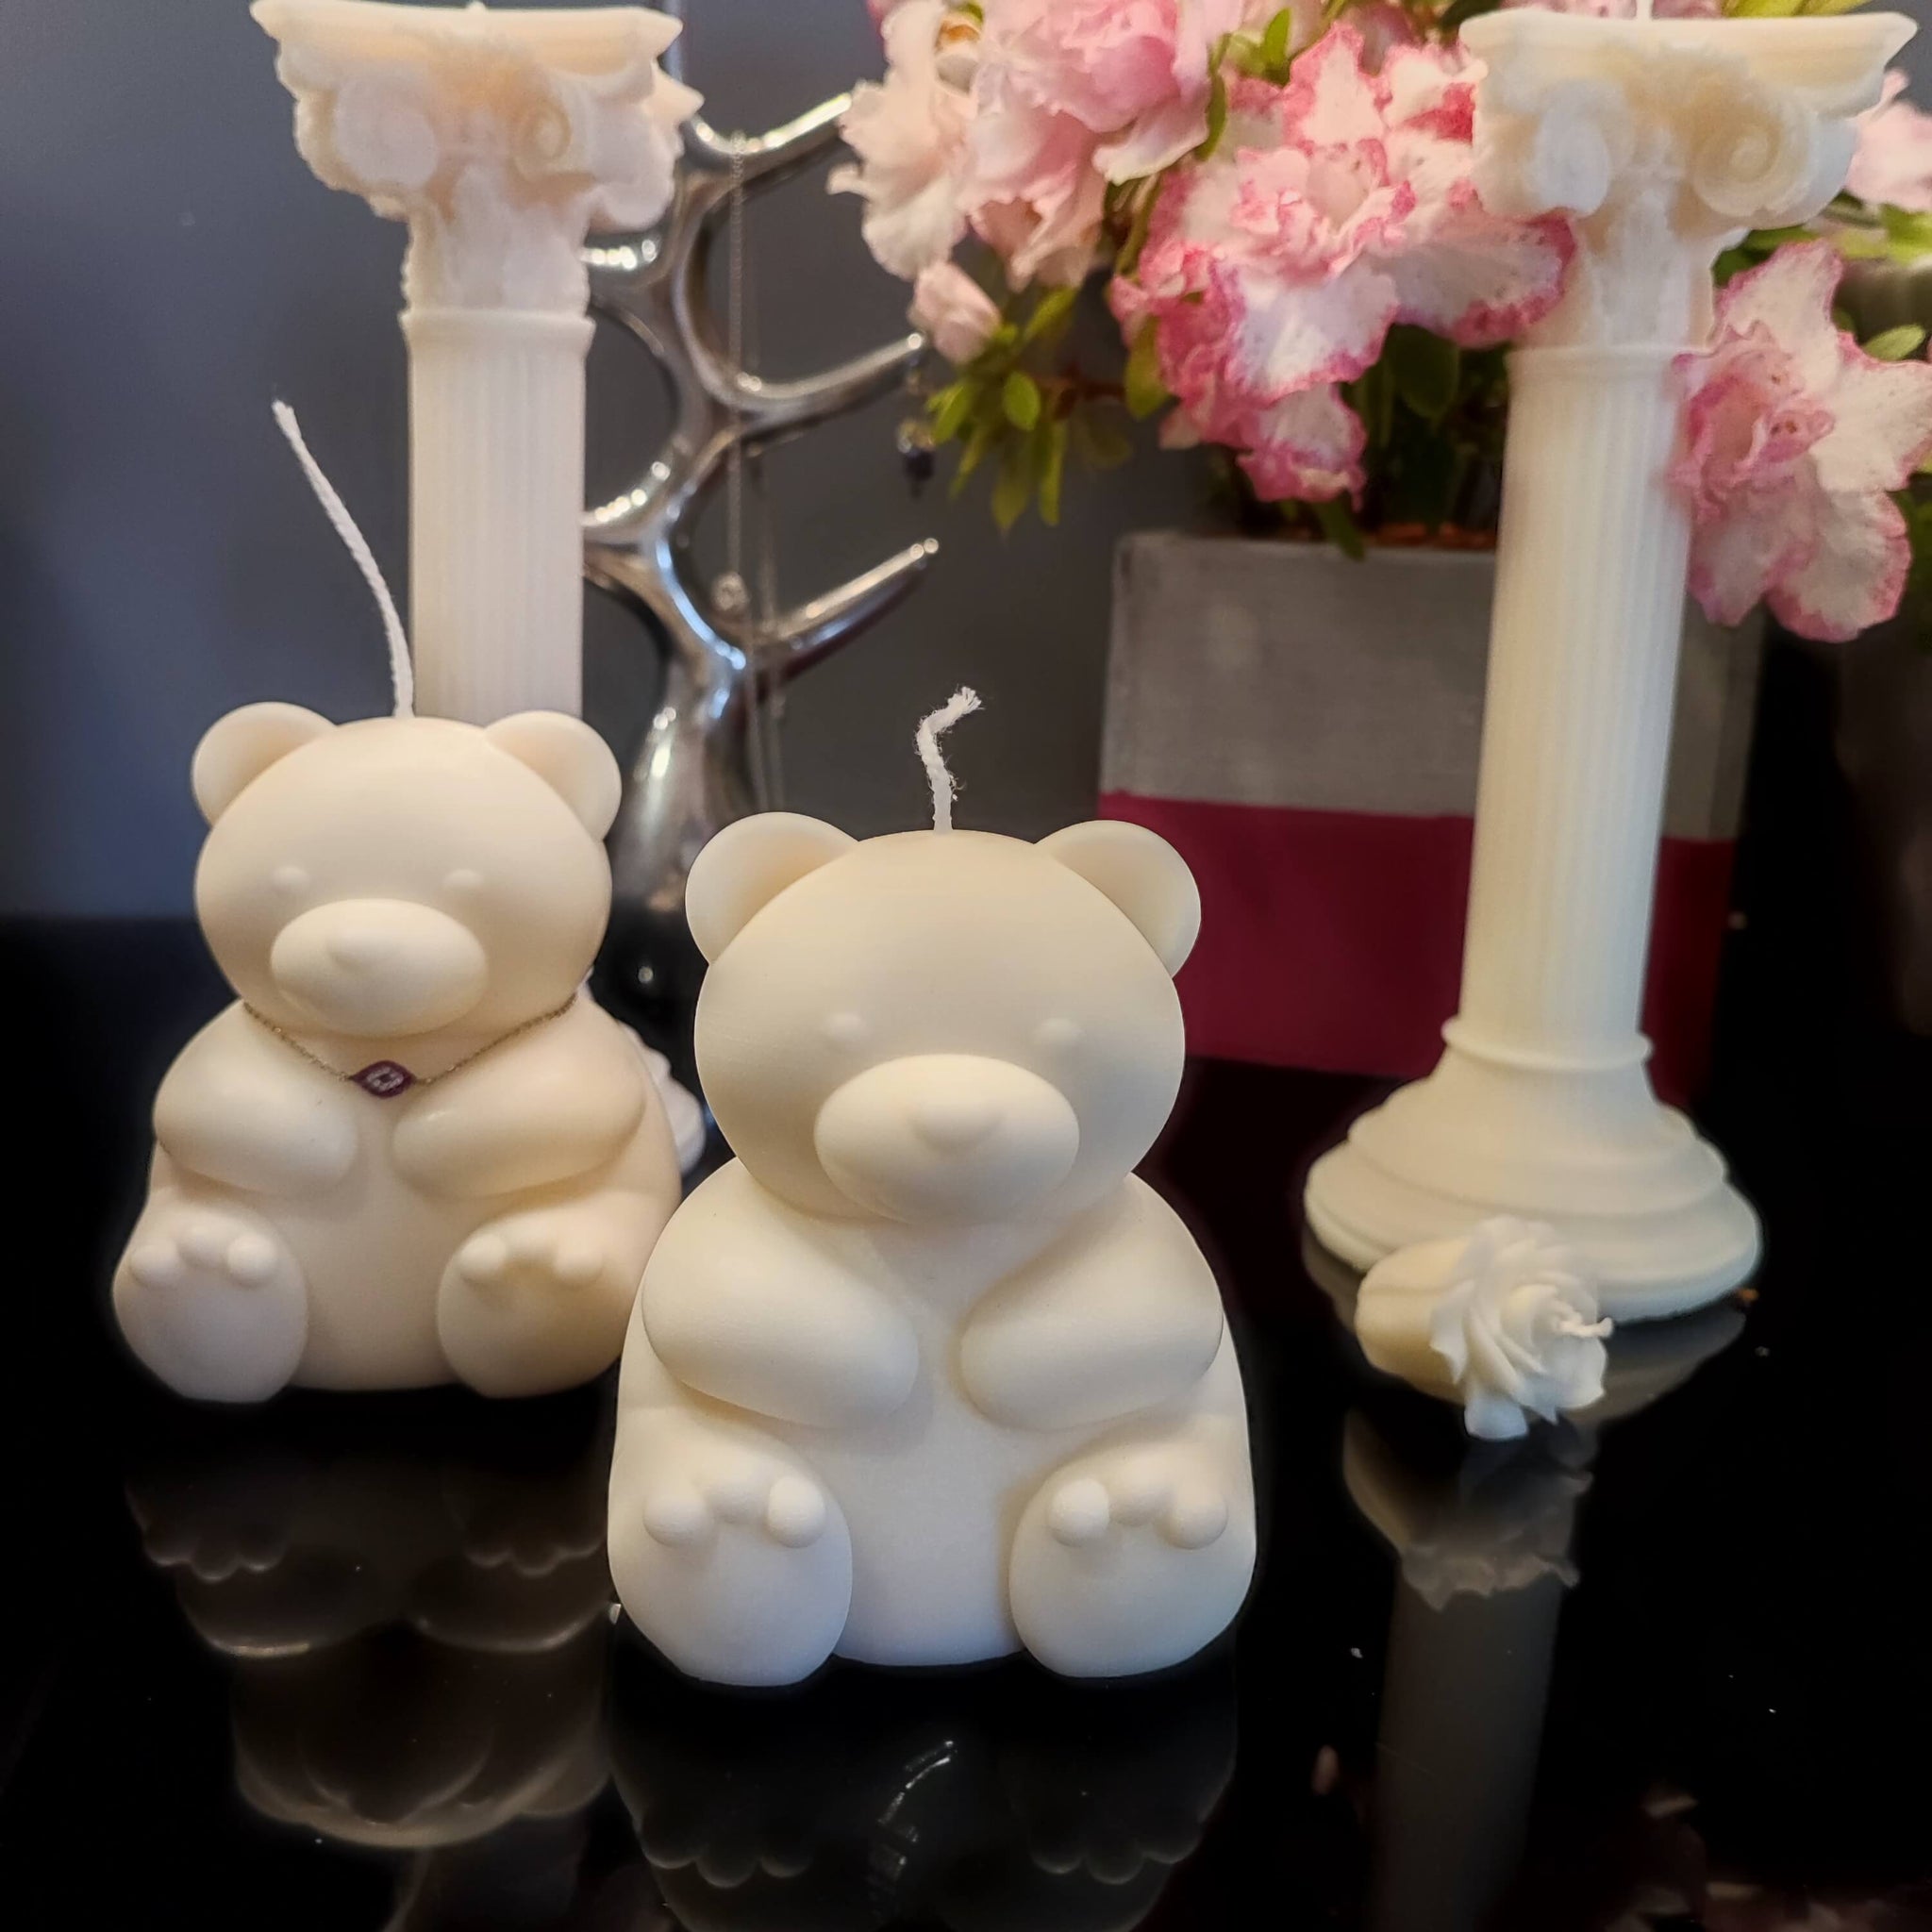 Scented Jar candle with Teddy bear on top │ Soy Wax Candle